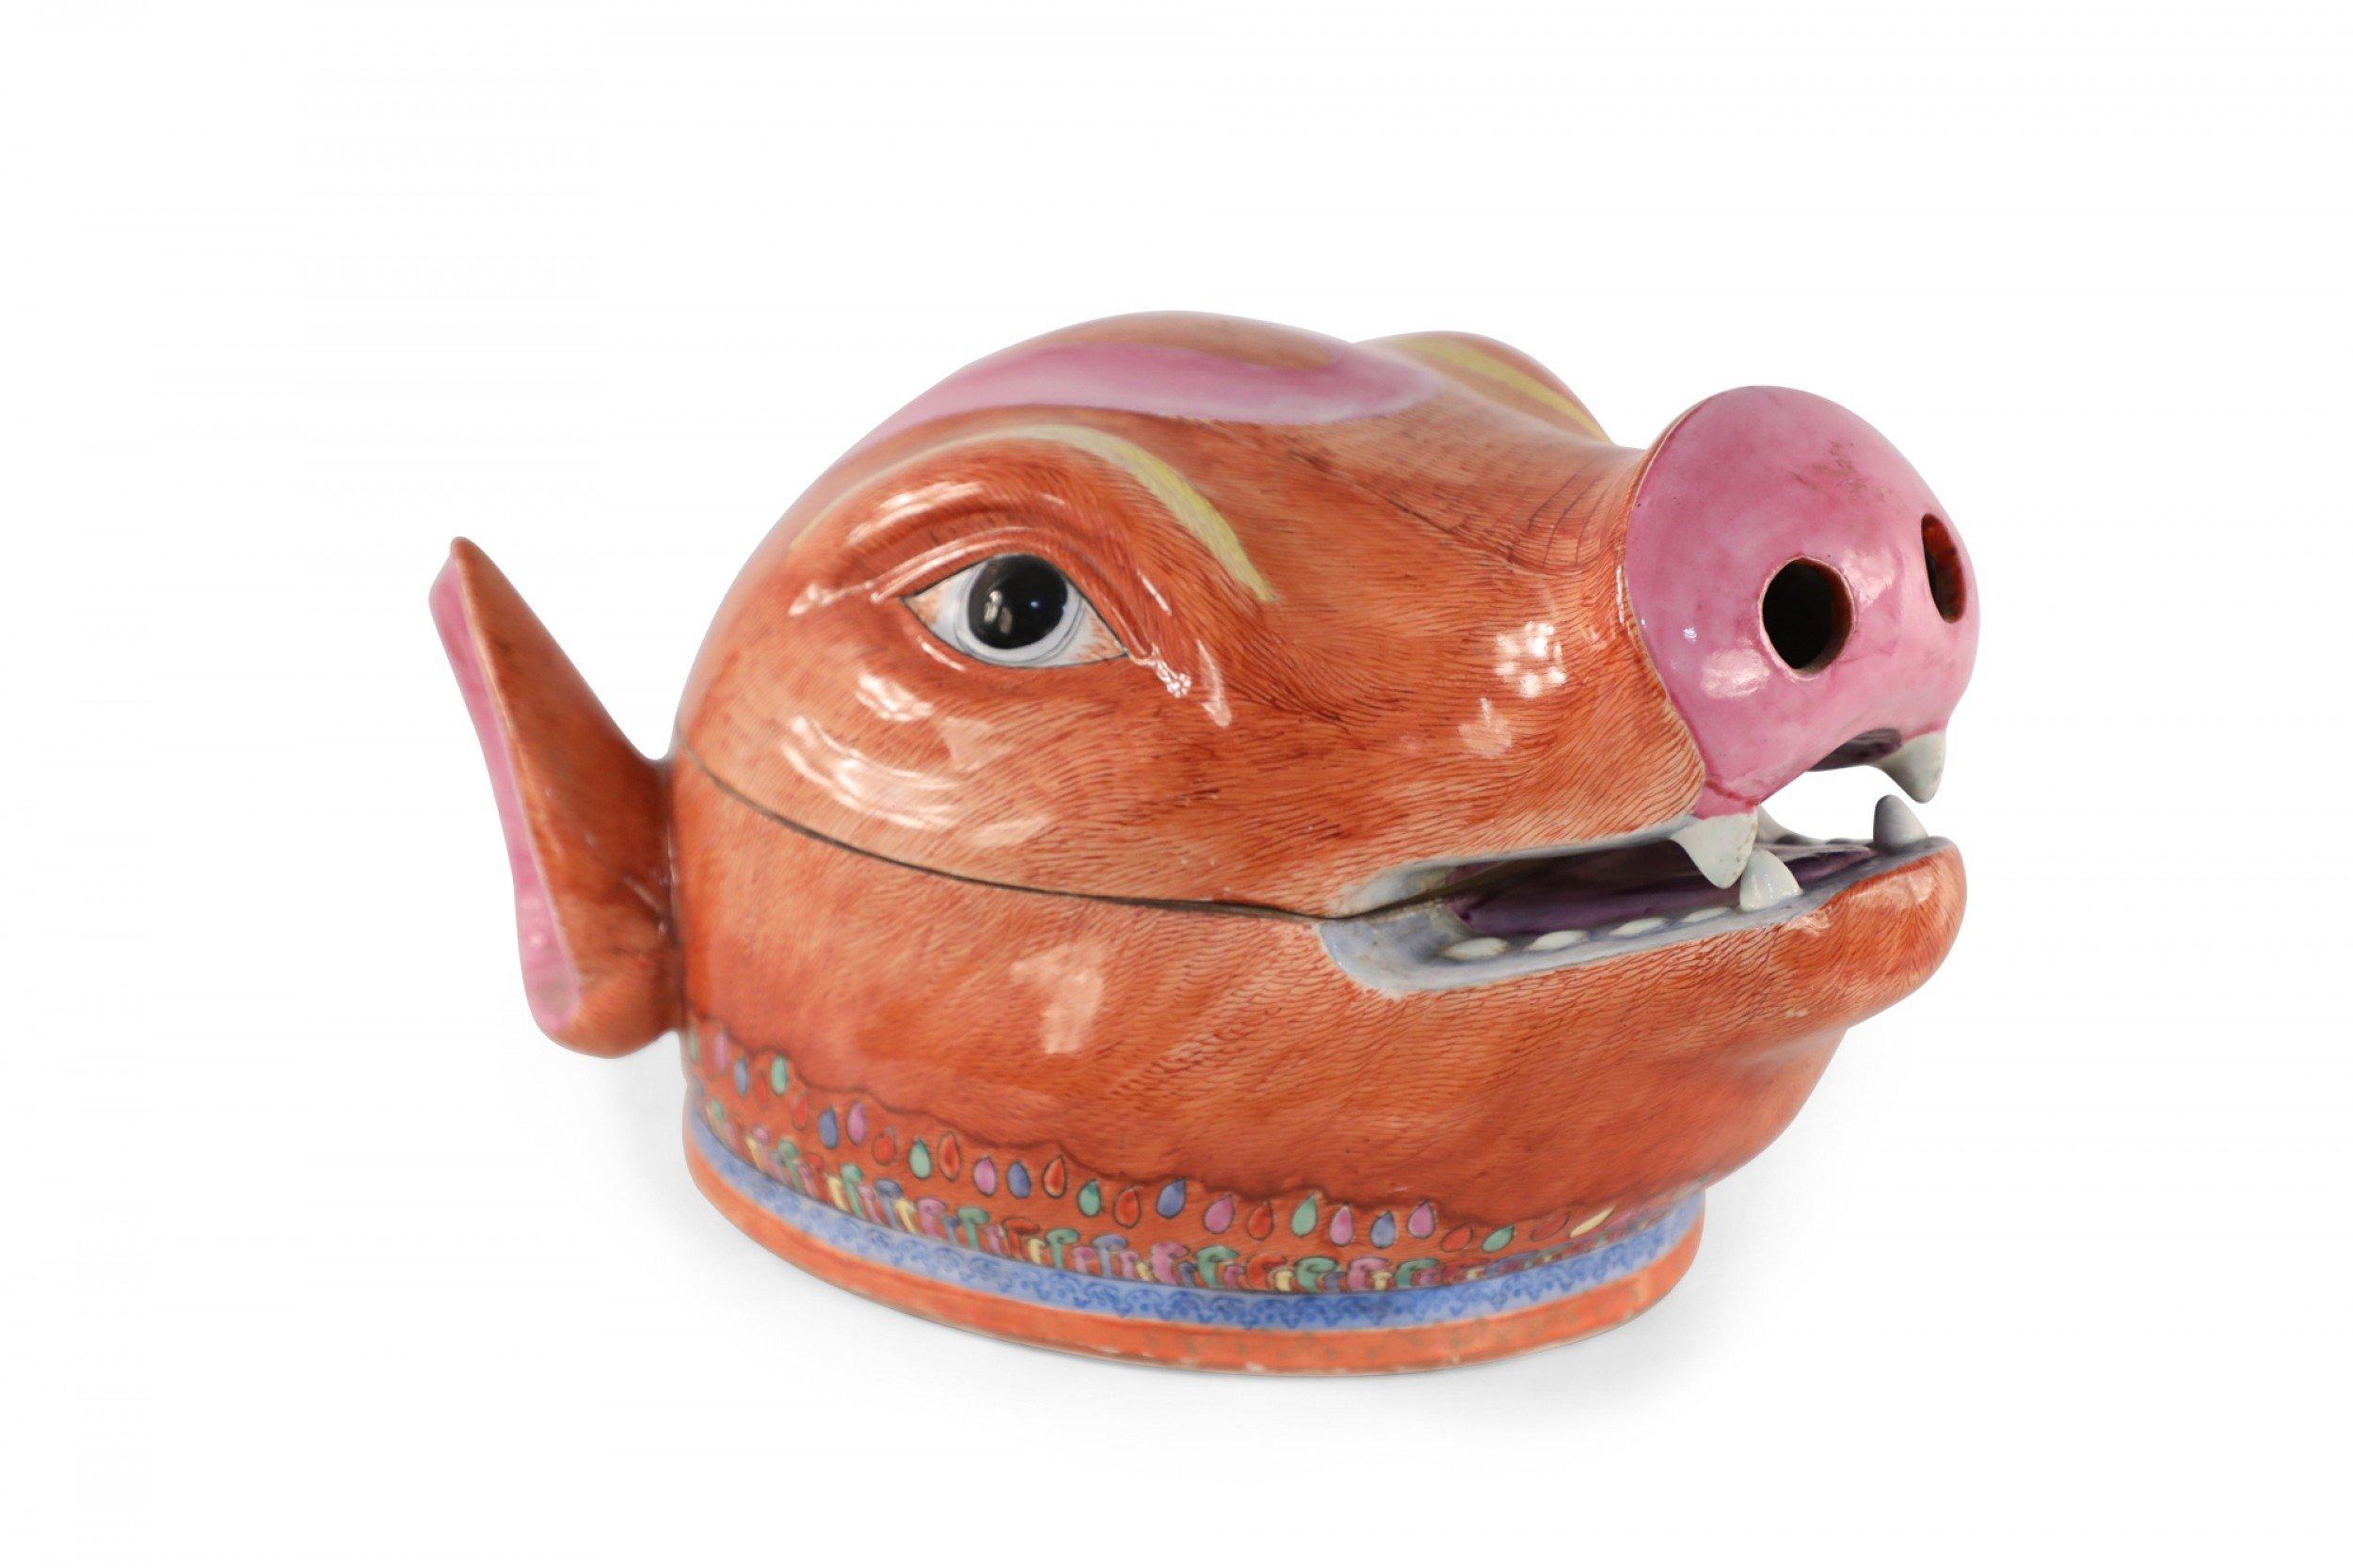 Antique Chinese (Early 20th Century) export porcelain tureen in the form of an orange and pink pig head divided into lid and base at the mouth, and decorated with a colorful pattern around the base.
 